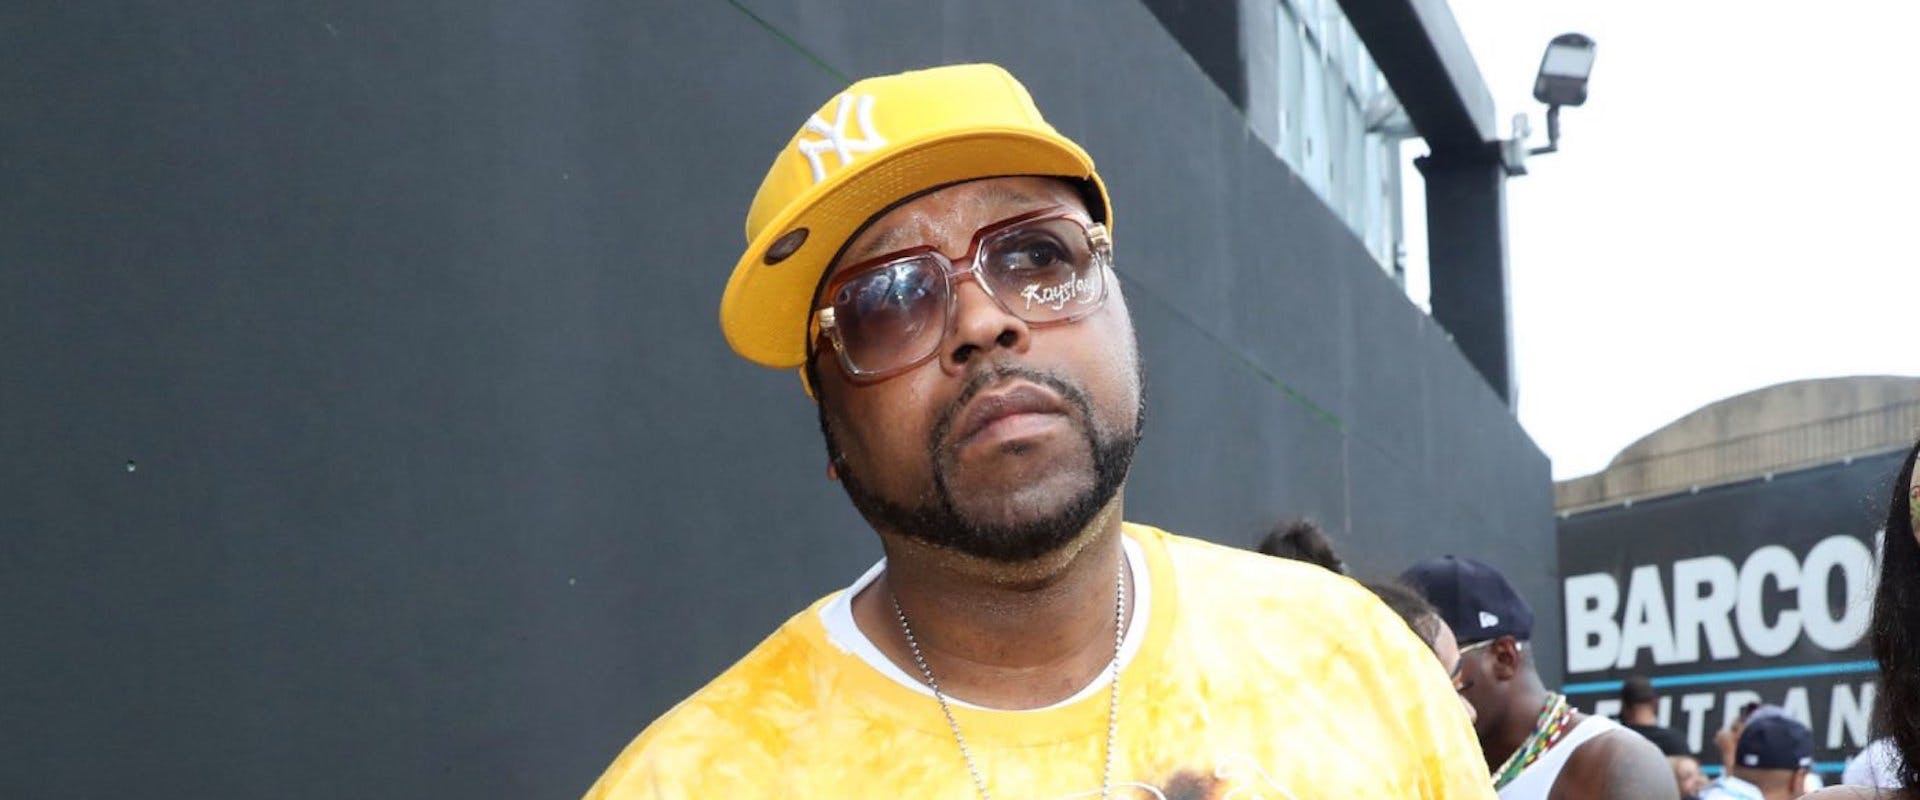 DJ Kay Slay attends the Tycoon Pool Party hosted by 50 Cent at Bar Code on August 18, 2019 in Elizabeth, New Jersey. (Photo by Johnny Nunez/WireImage)